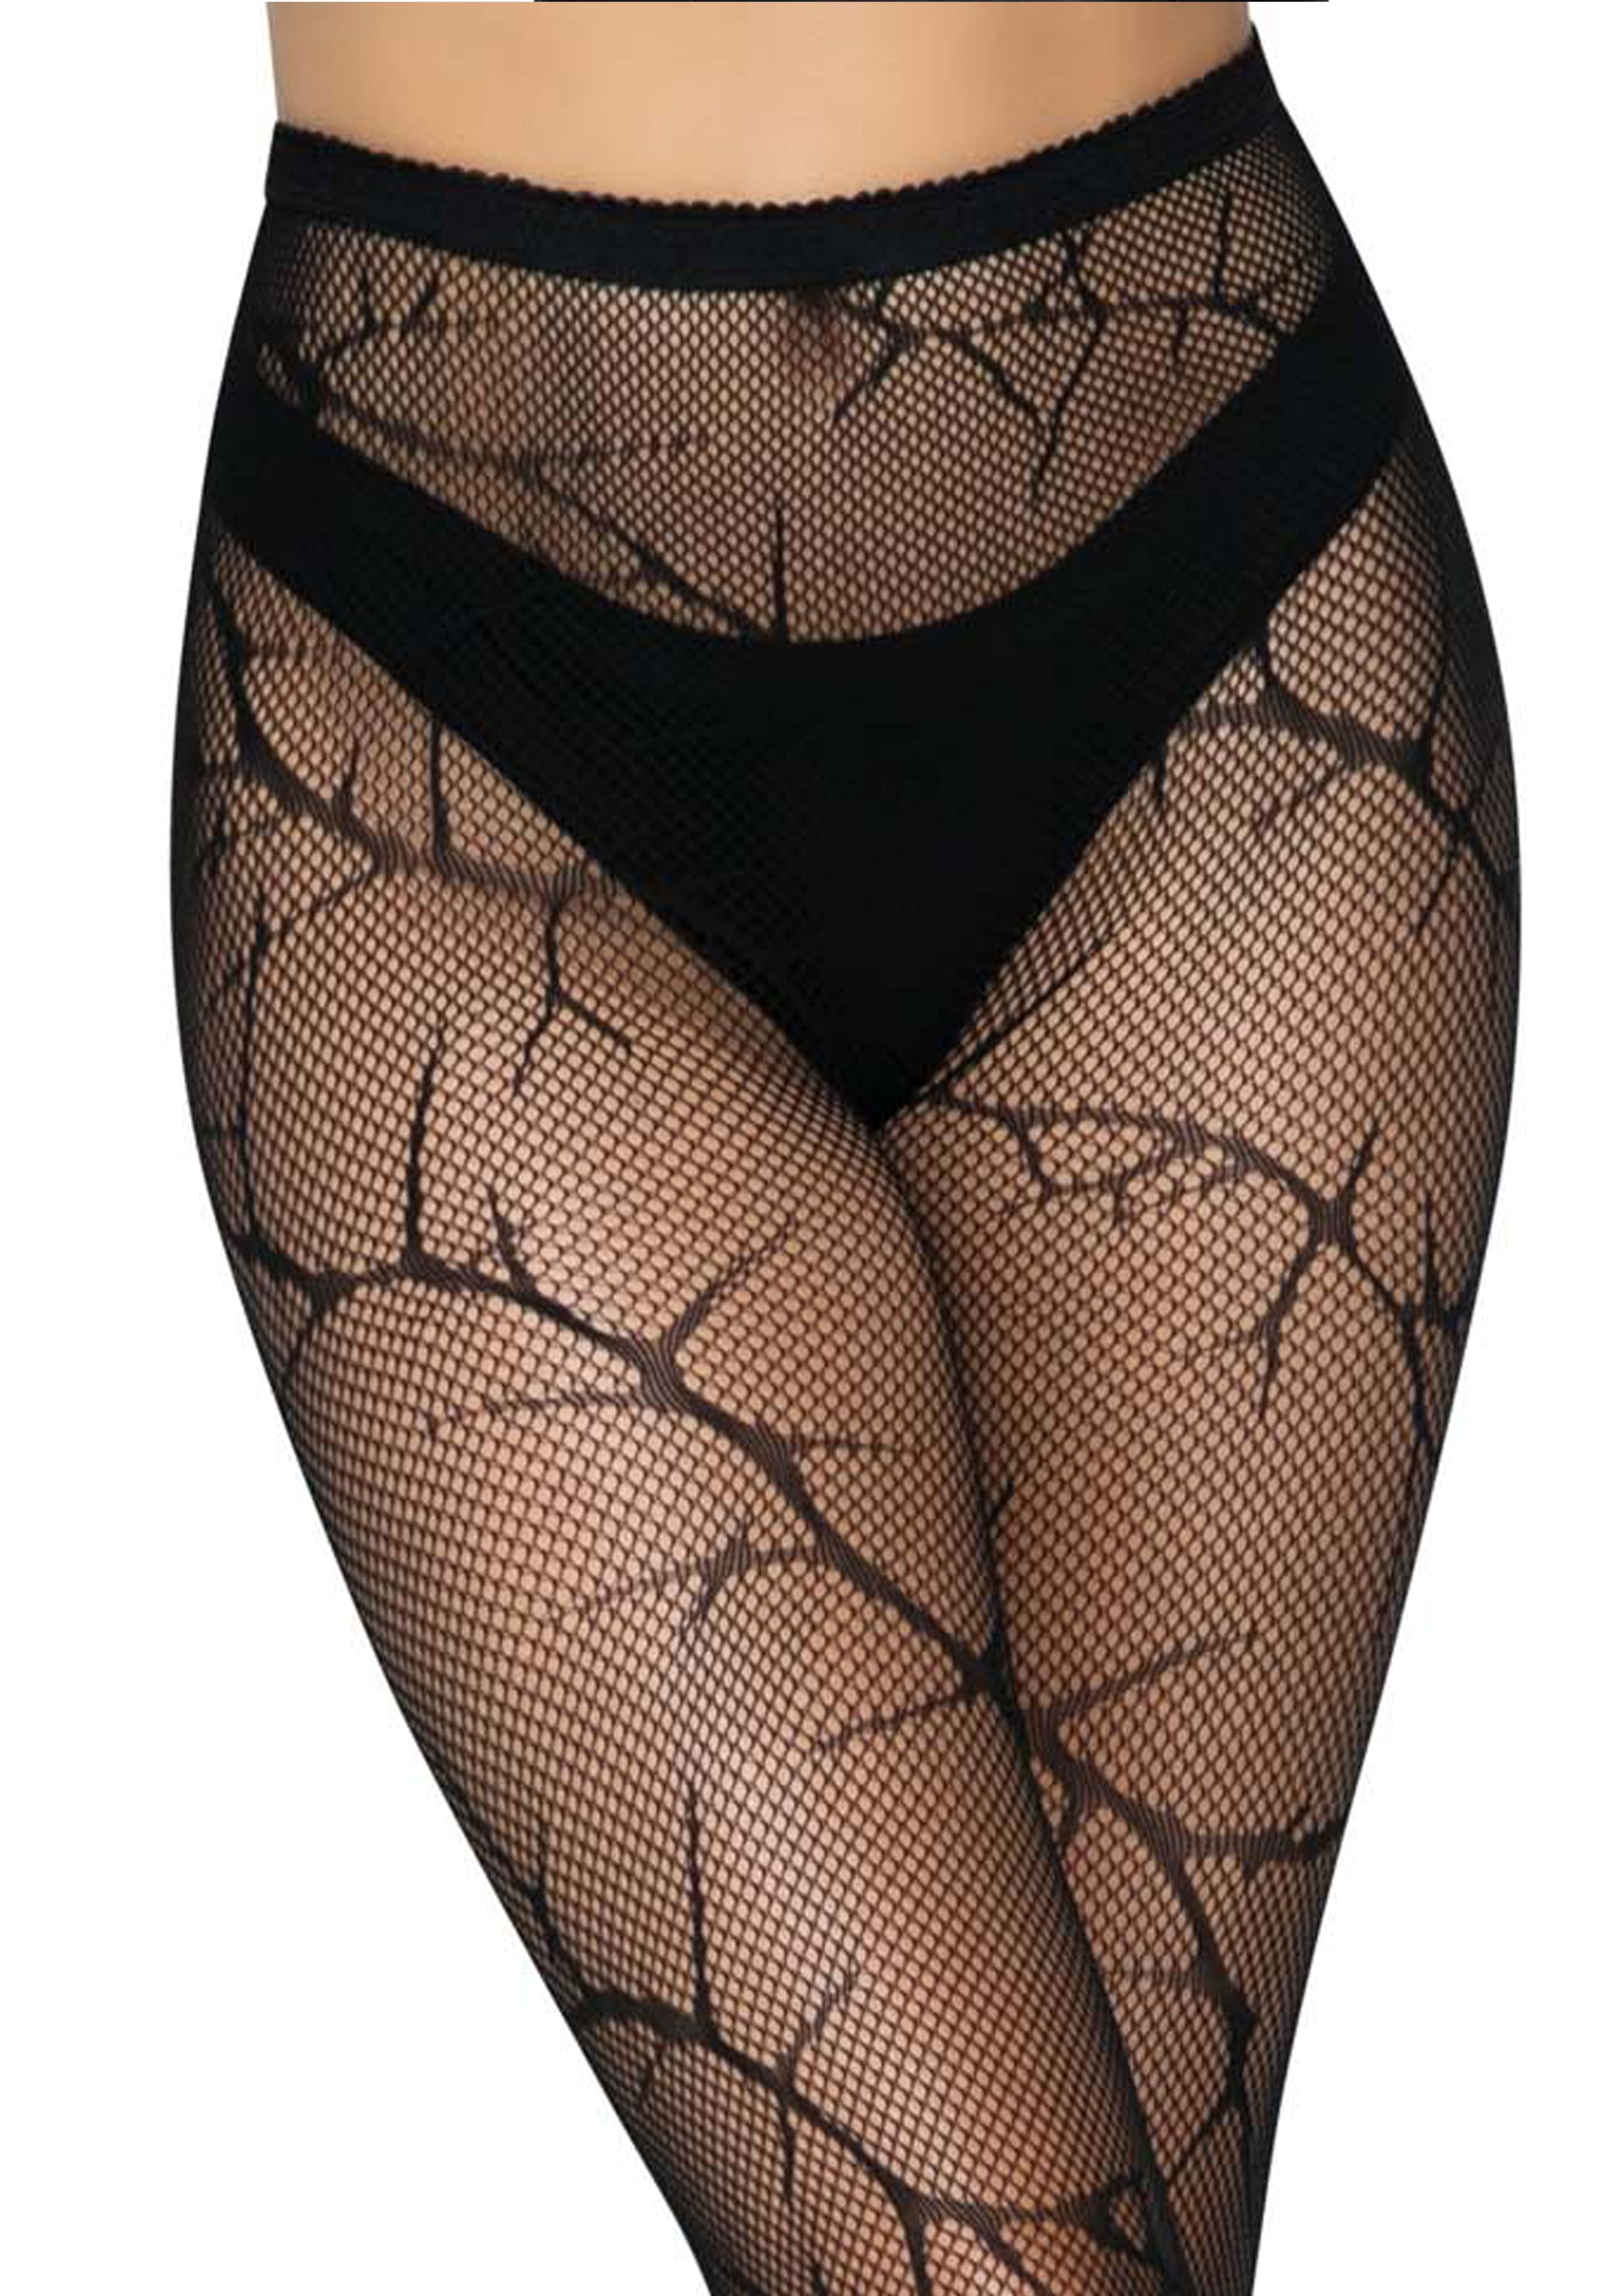 Cracked fishnet tights